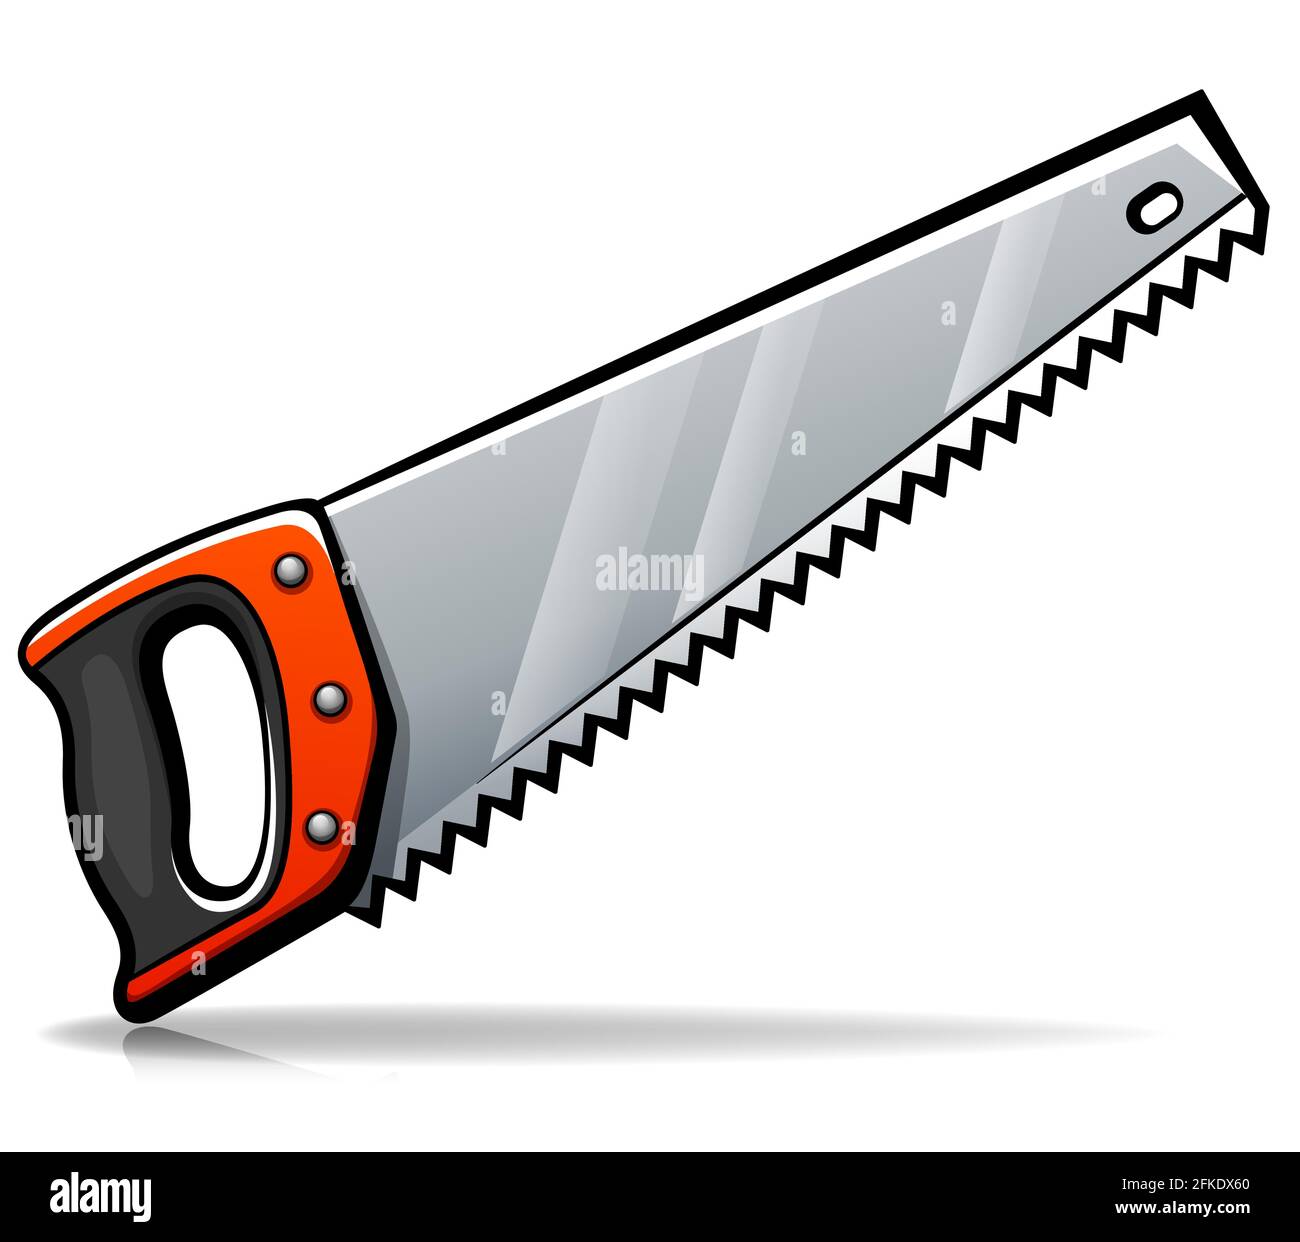 Vector illustration of hand saw cartoon isolated Stock Vector